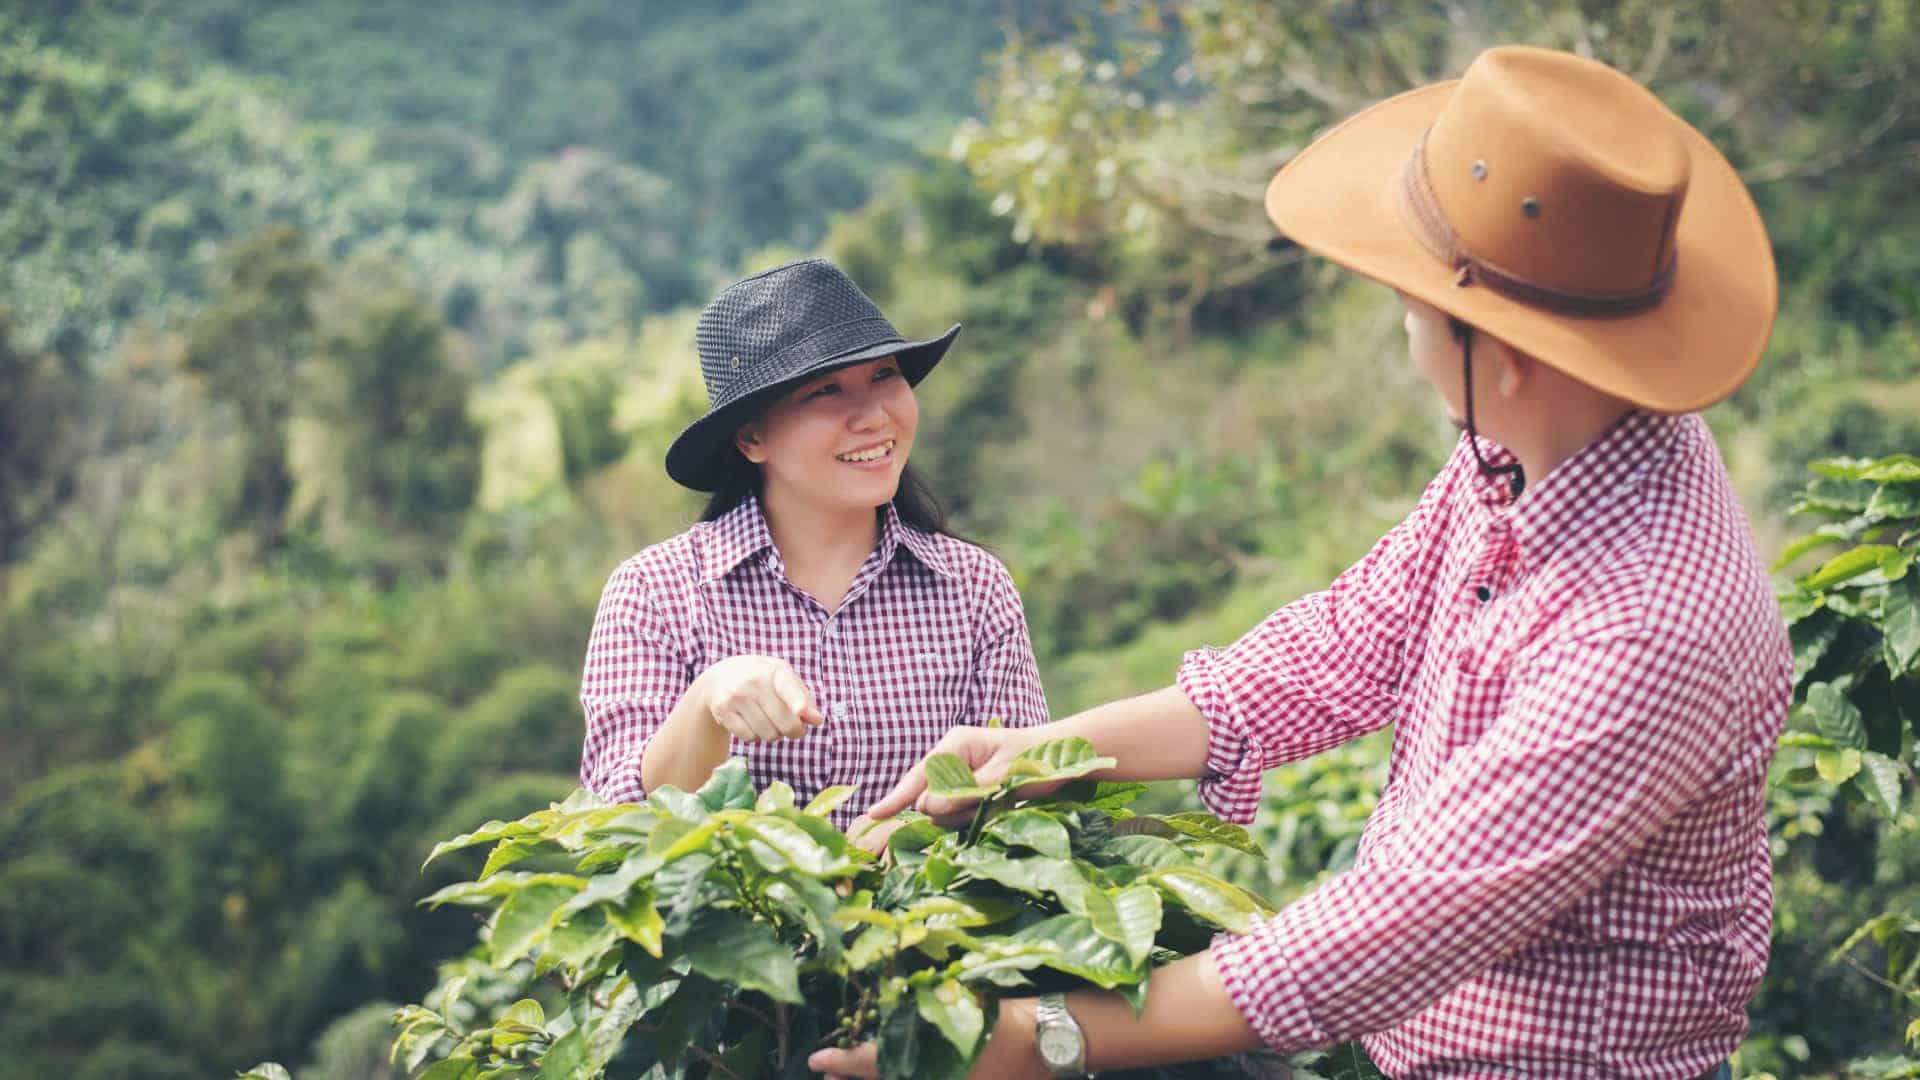 Two people wearing hats and plaid shirts picking coffee beans on a plantation with lush greenery in the background.